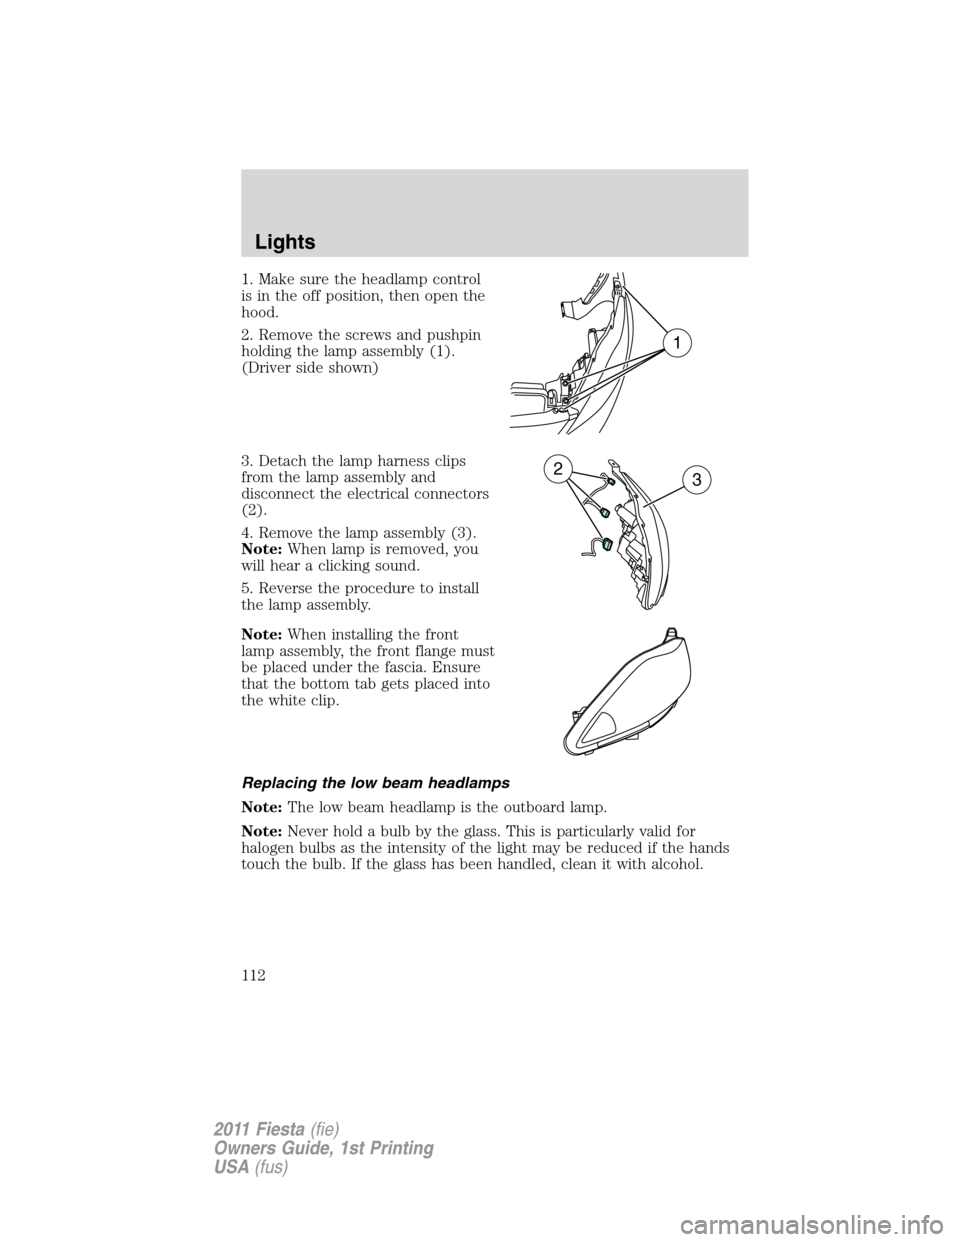 FORD FIESTA 2011 6.G Owners Manual 1. Make sure the headlamp control
is in the off position, then open the
hood.
2. Remove the screws and pushpin
holding the lamp assembly (1).
(Driver side shown)
3. Detach the lamp harness clips
from 